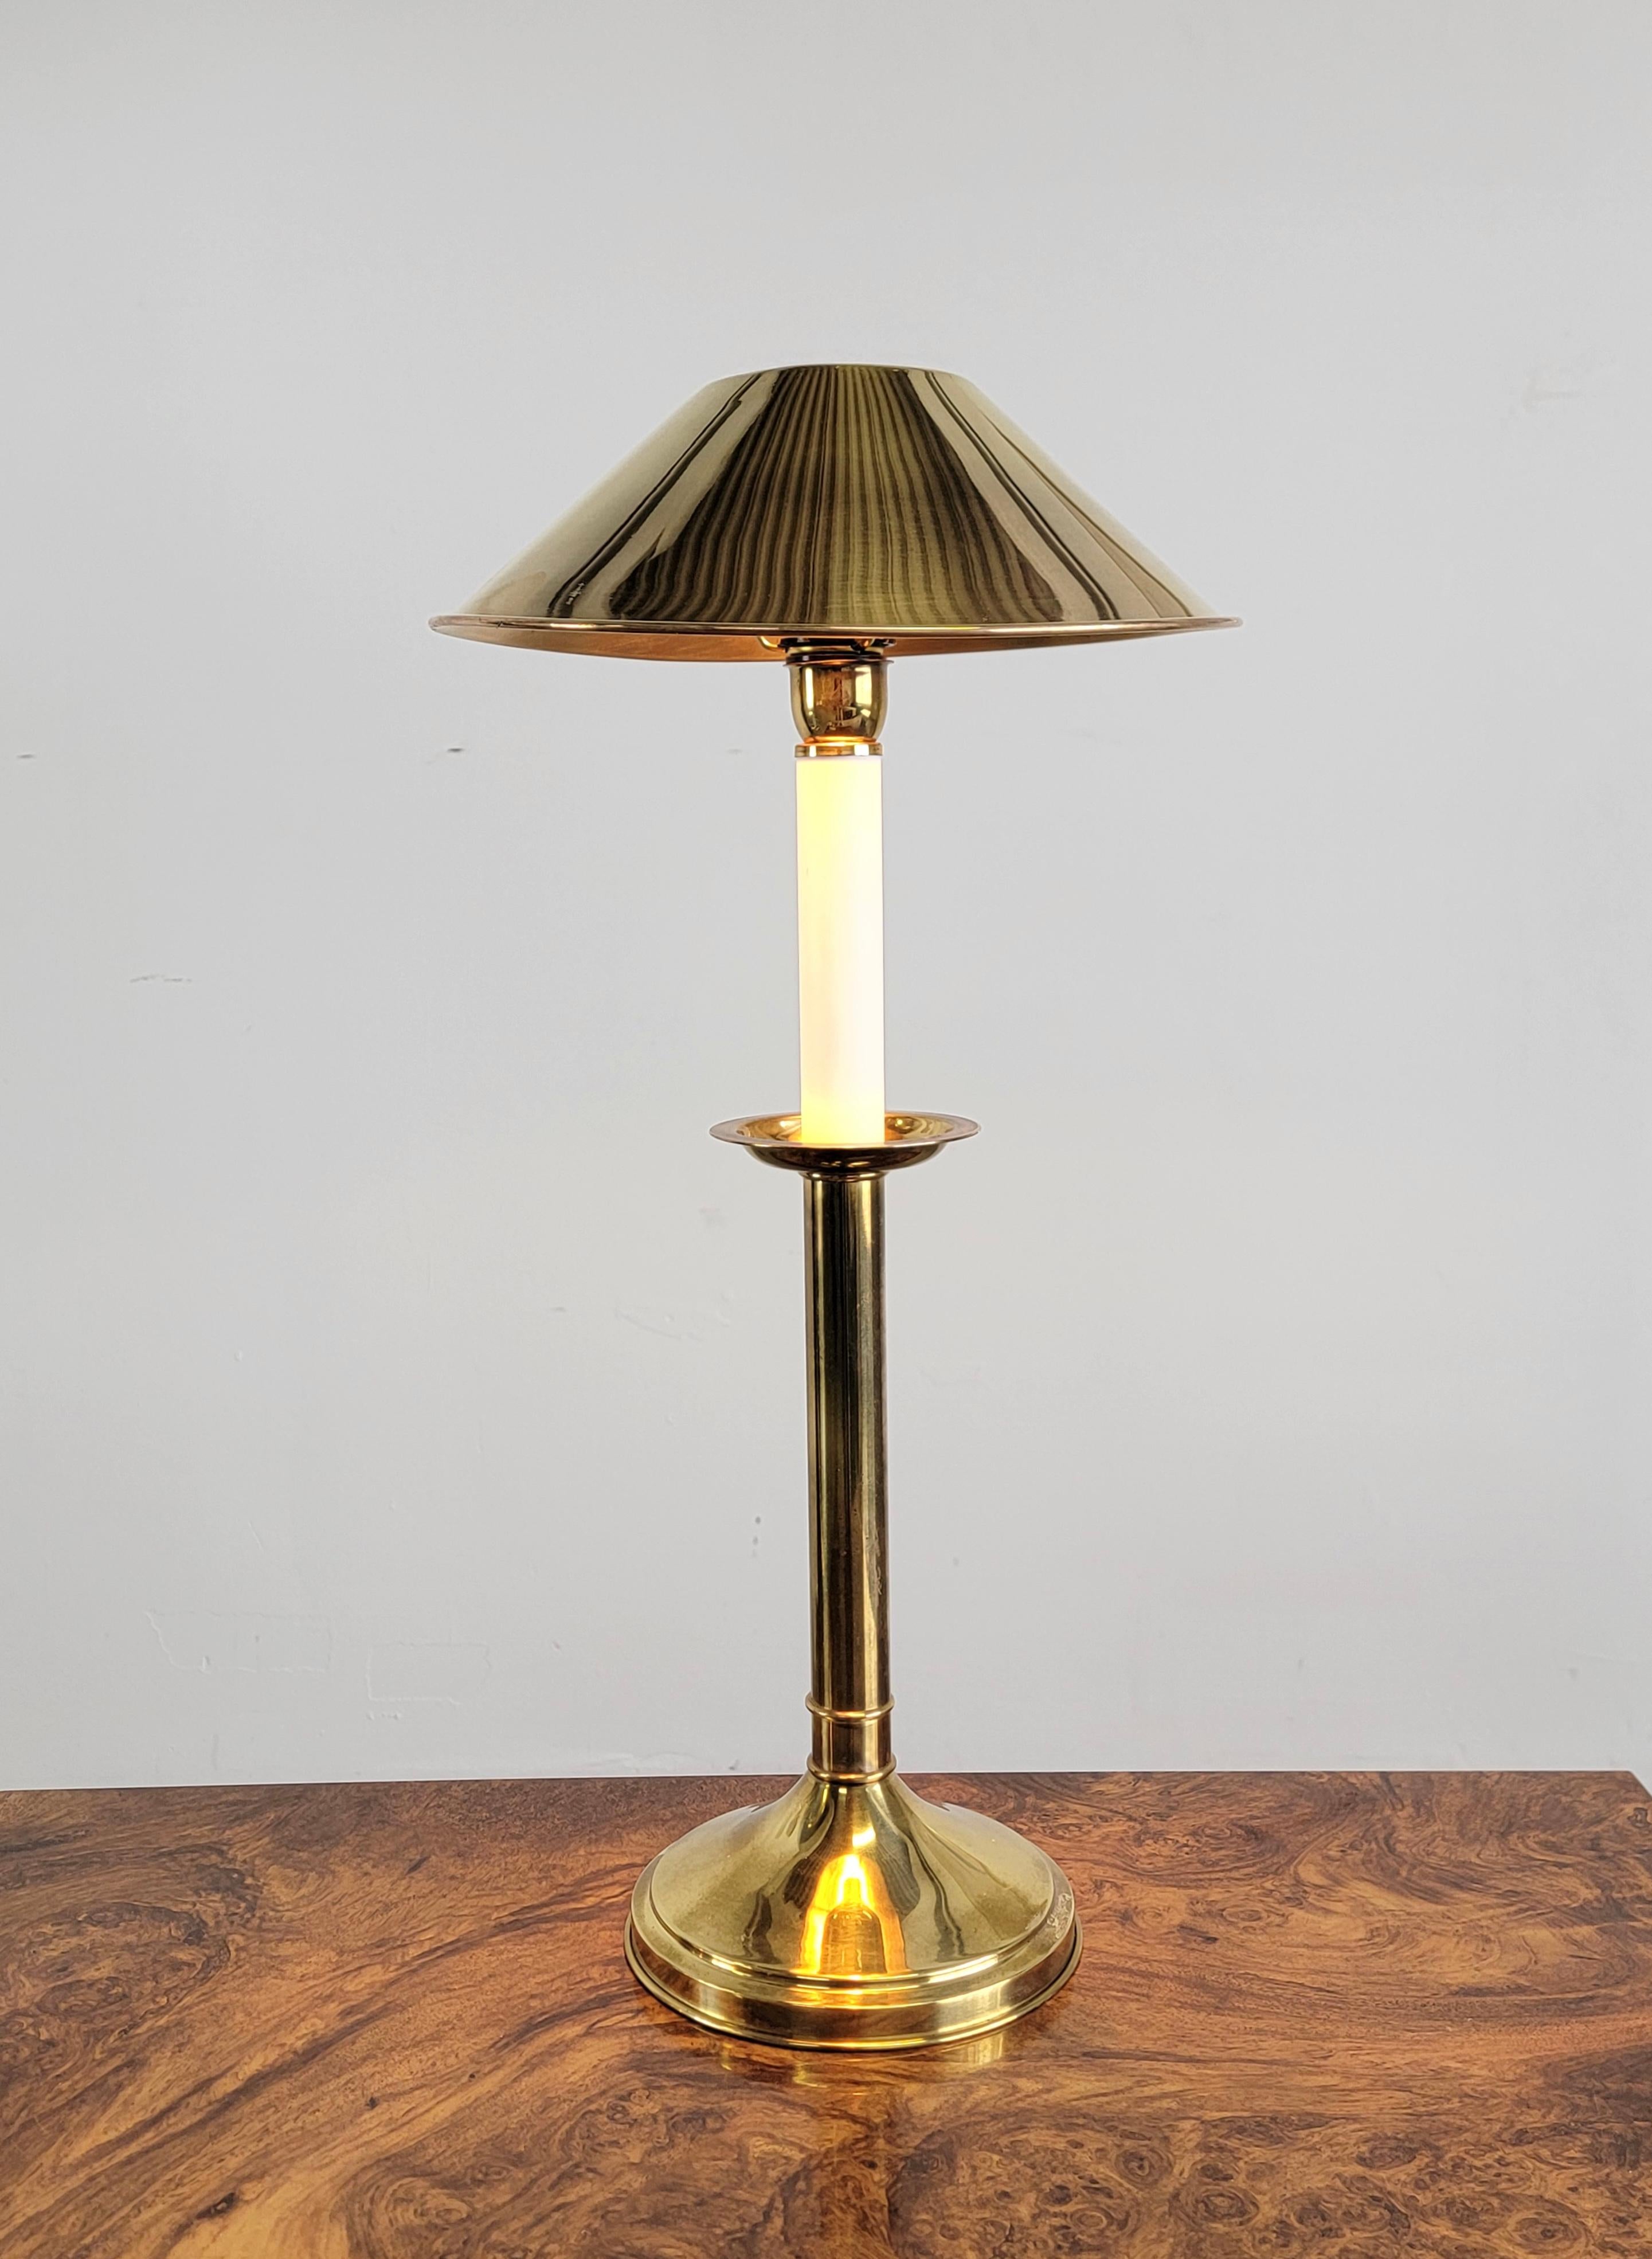 Rare Tommaso Barbi brass table lamp made in the 1970s. This stunning lamp is finished in brass with a lacquer detail.  It’s stamped ‘Tommaso Barbi, made in Italy’ at the bottom of the base. The brass body is in overall good condition, there’s some